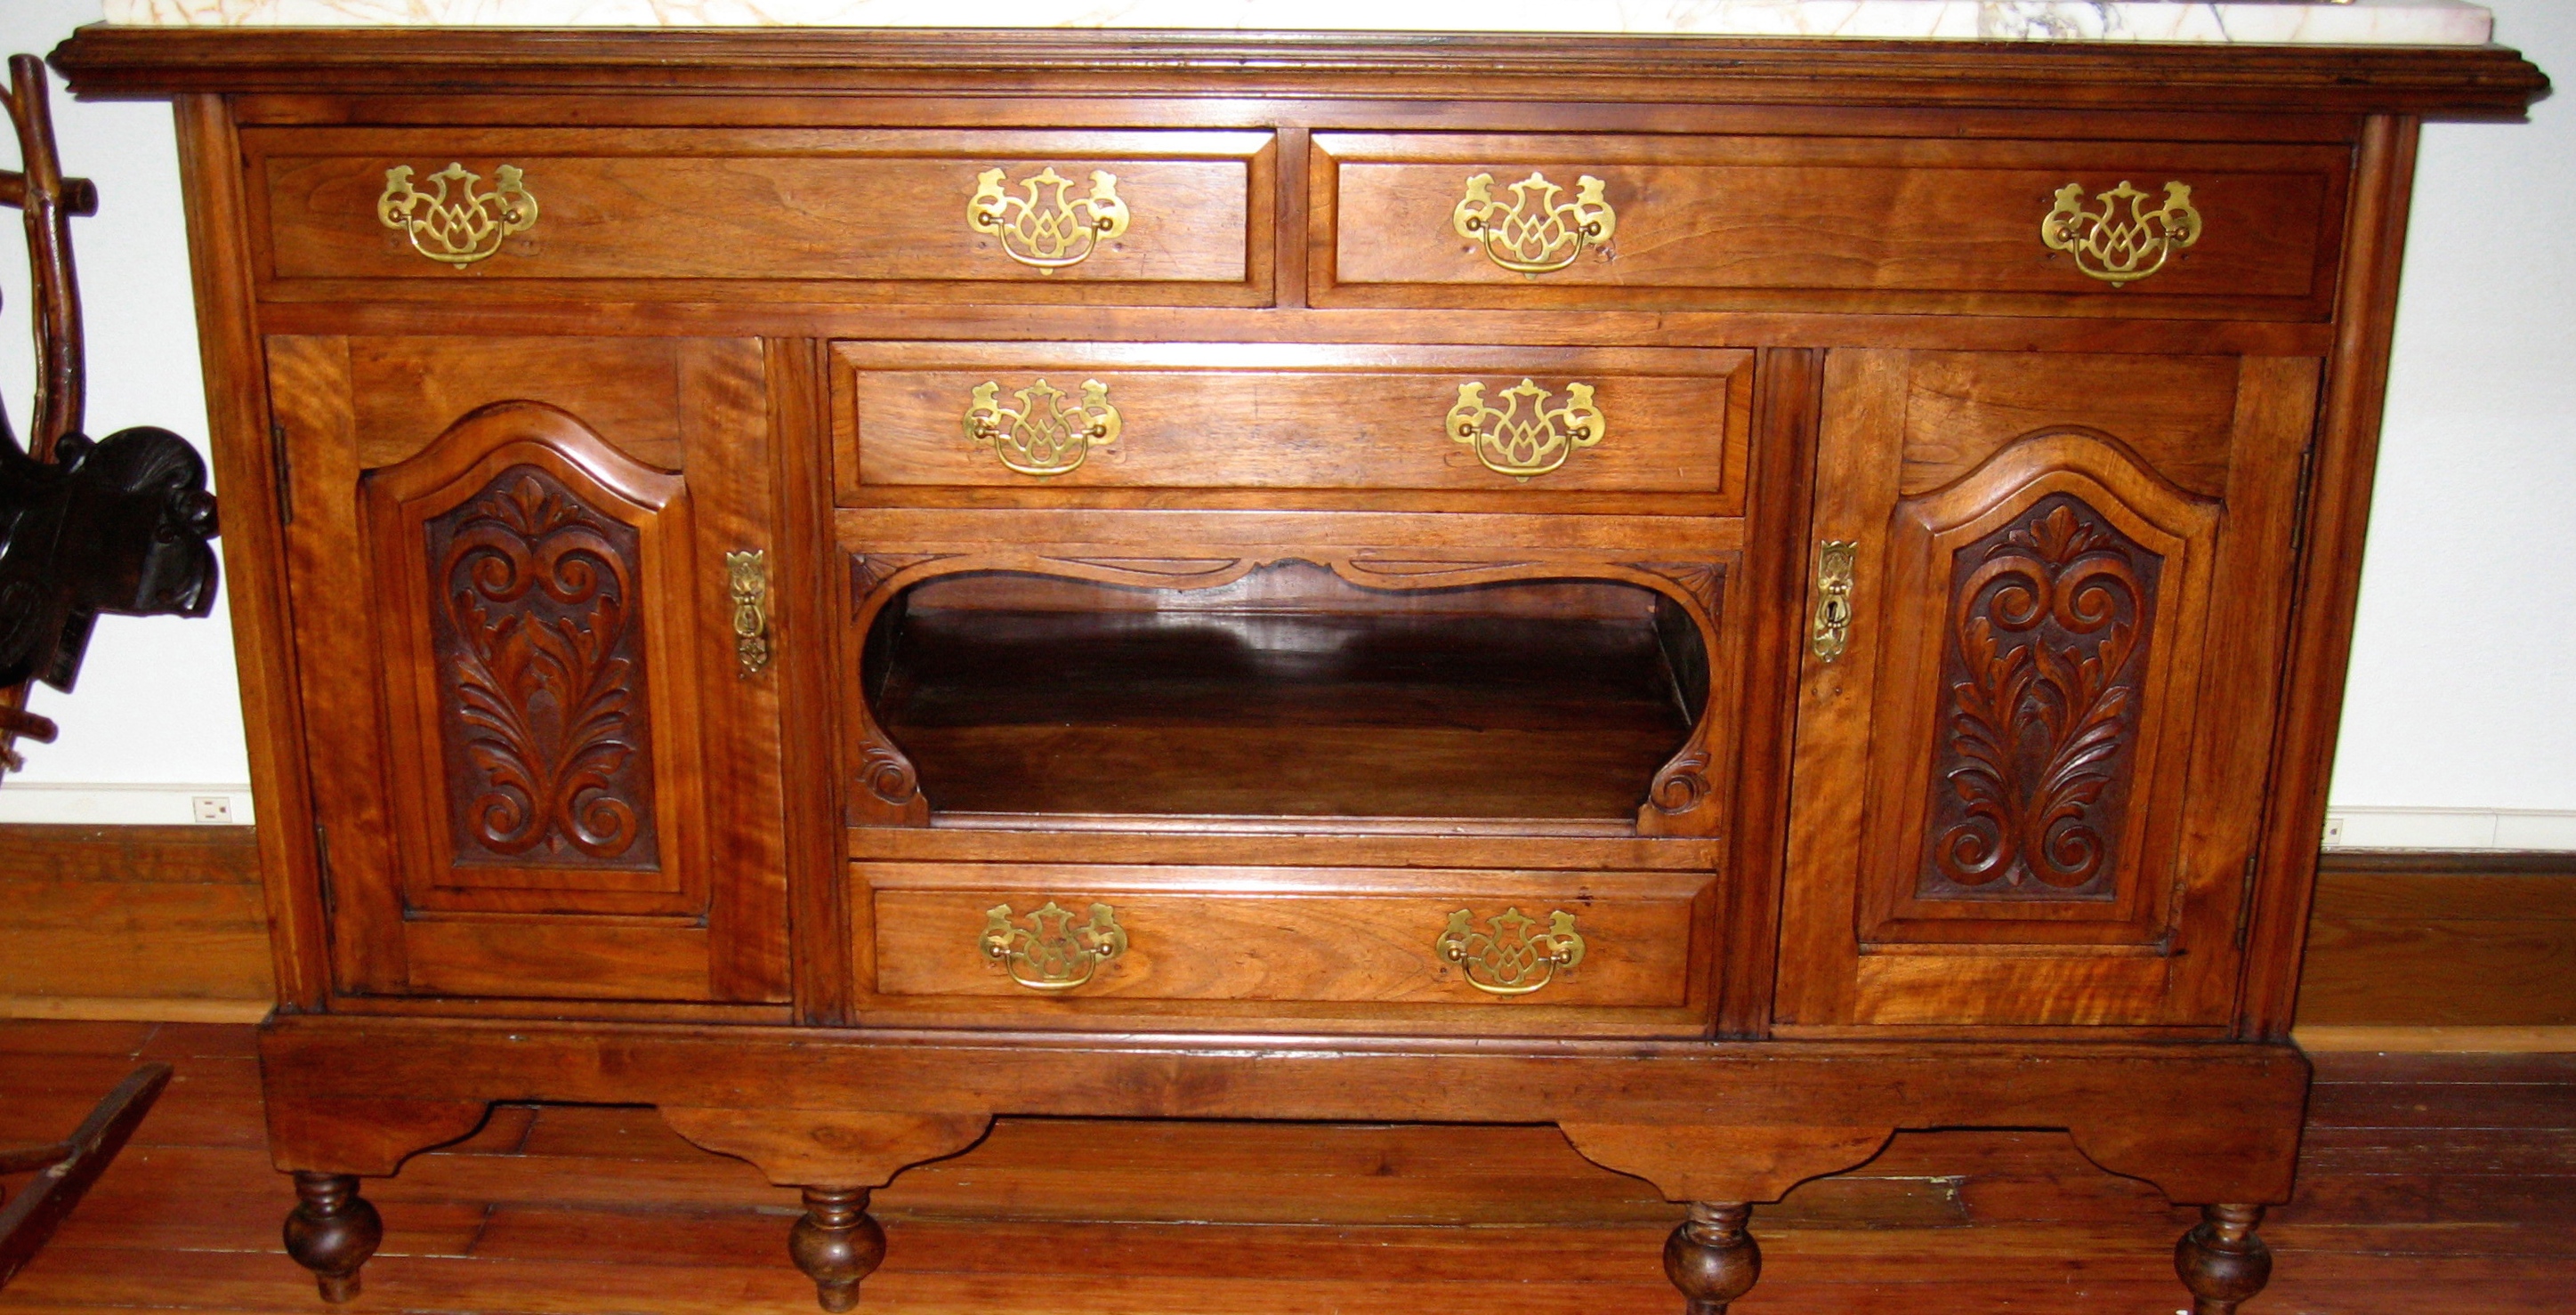 19th Century English Walnut Sideboard (20 1/2" D x 61" W x 36 1/2" H) (Original Condition - We Will restore to Your Specifications)